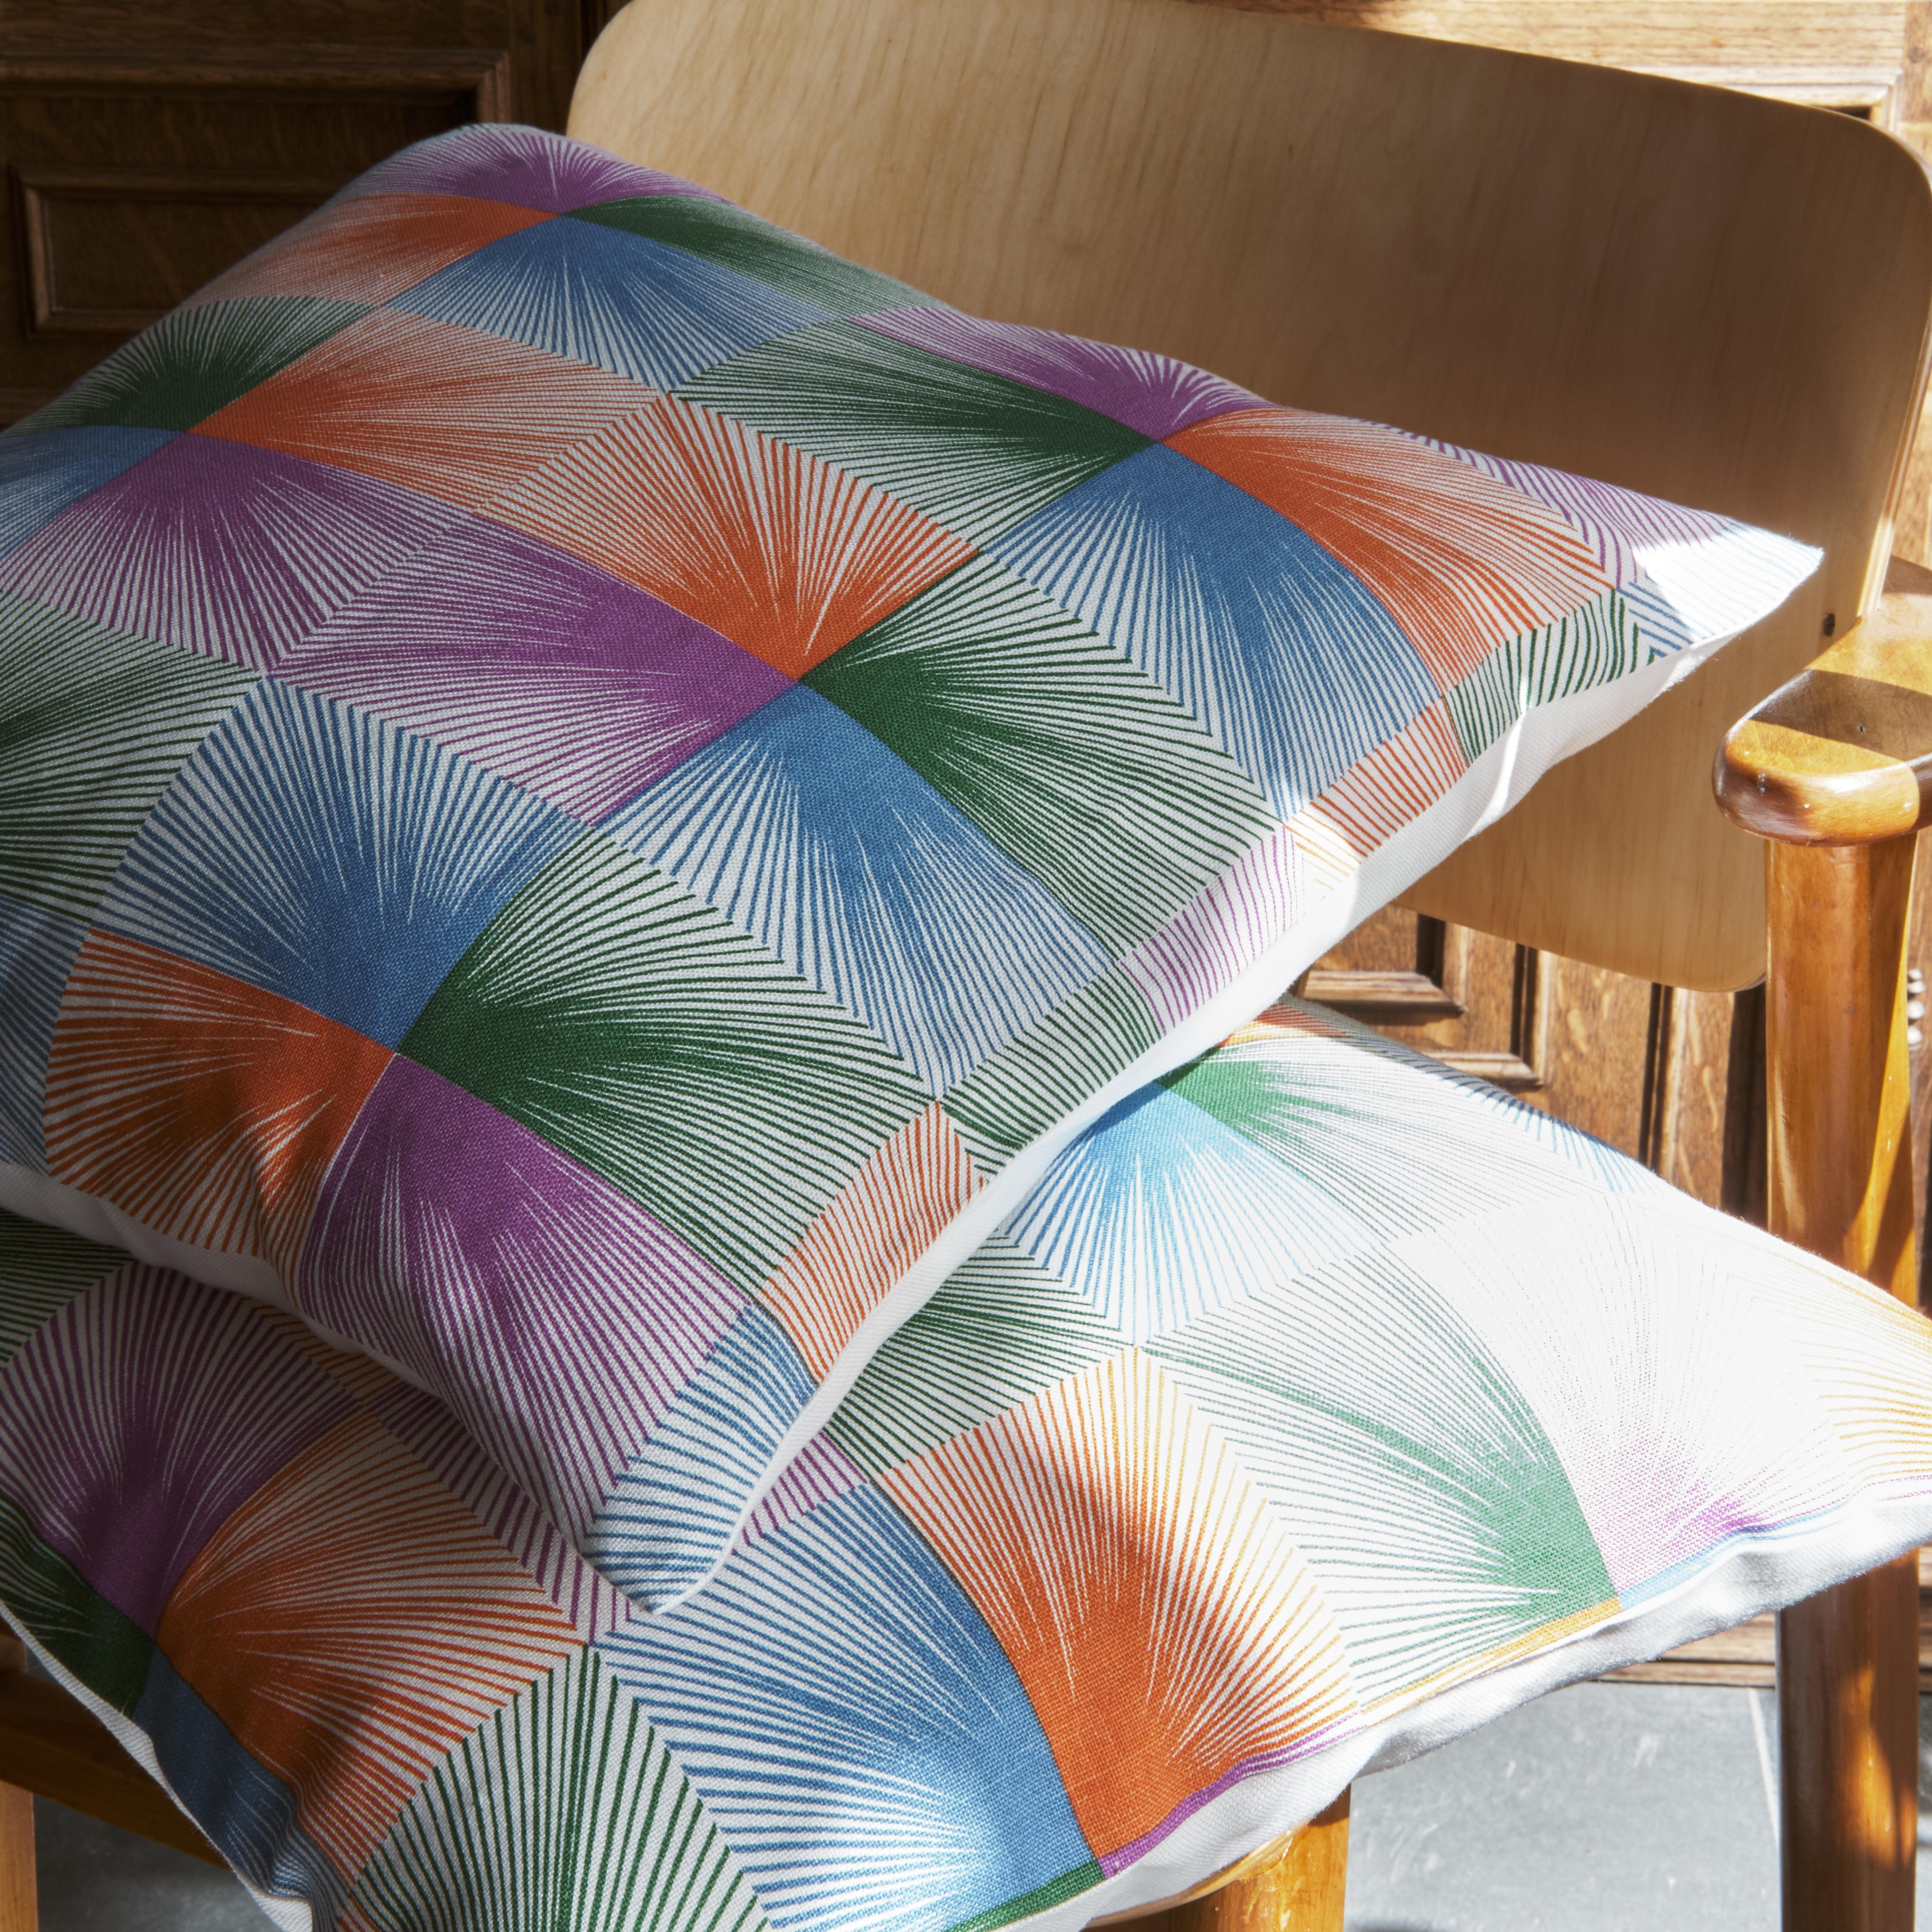 Reflection, cushion cover by Lothar Götz is Presented by Saison International

Reflection, created exclusively for Saison International, exudes a playful vibrancy, with methodically drawn and highly colourful geometric lines mirrored across the